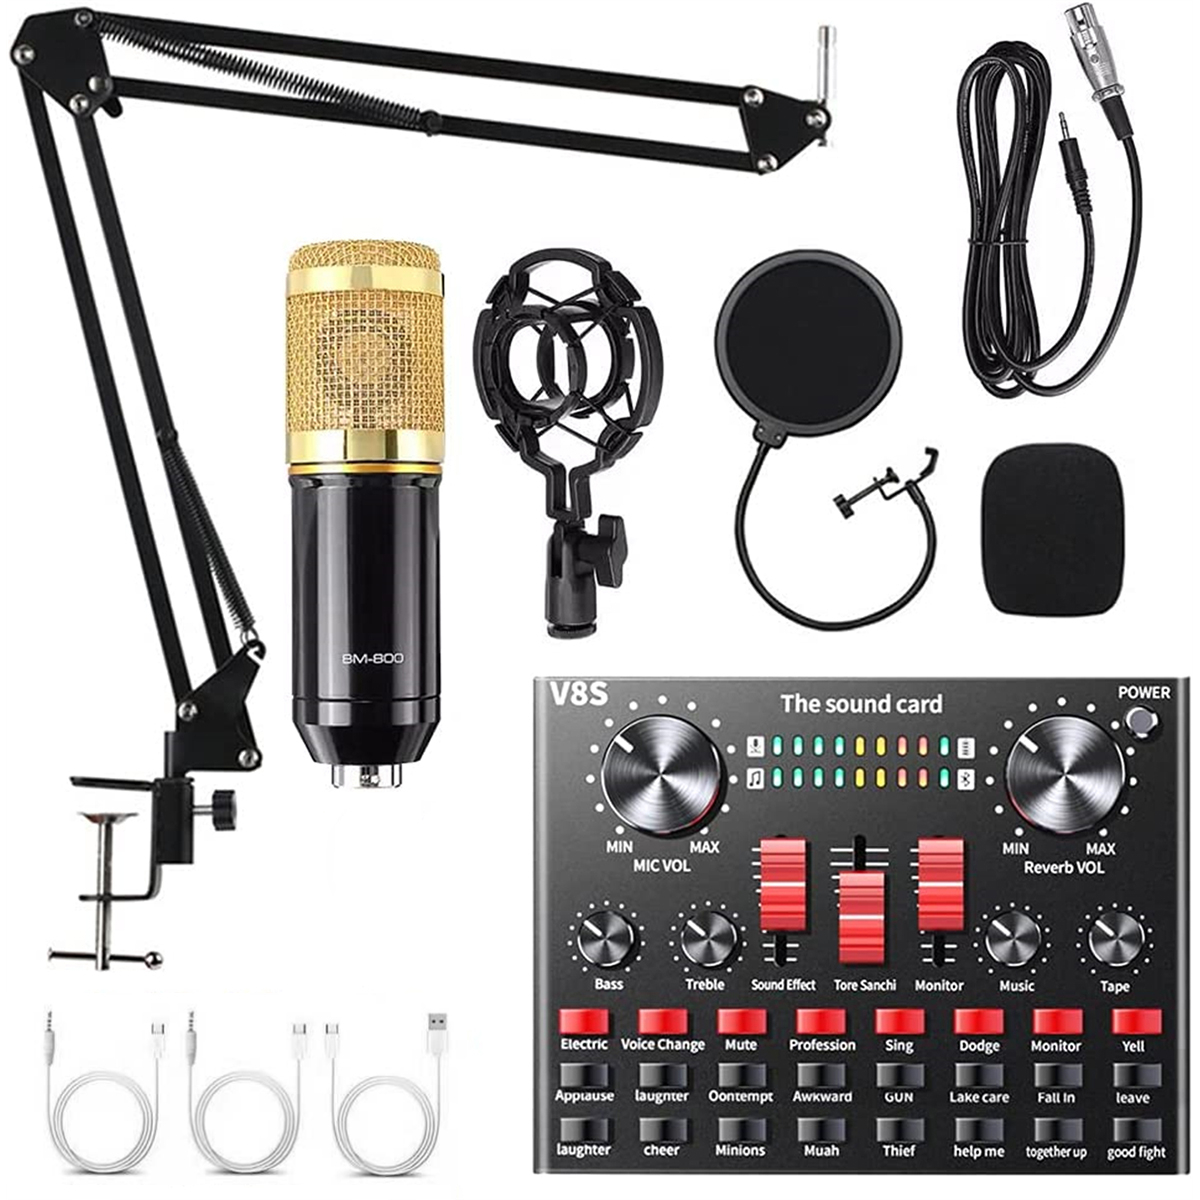 Is the BM800 worth $4? (Excelvan Condenser Microphone Review